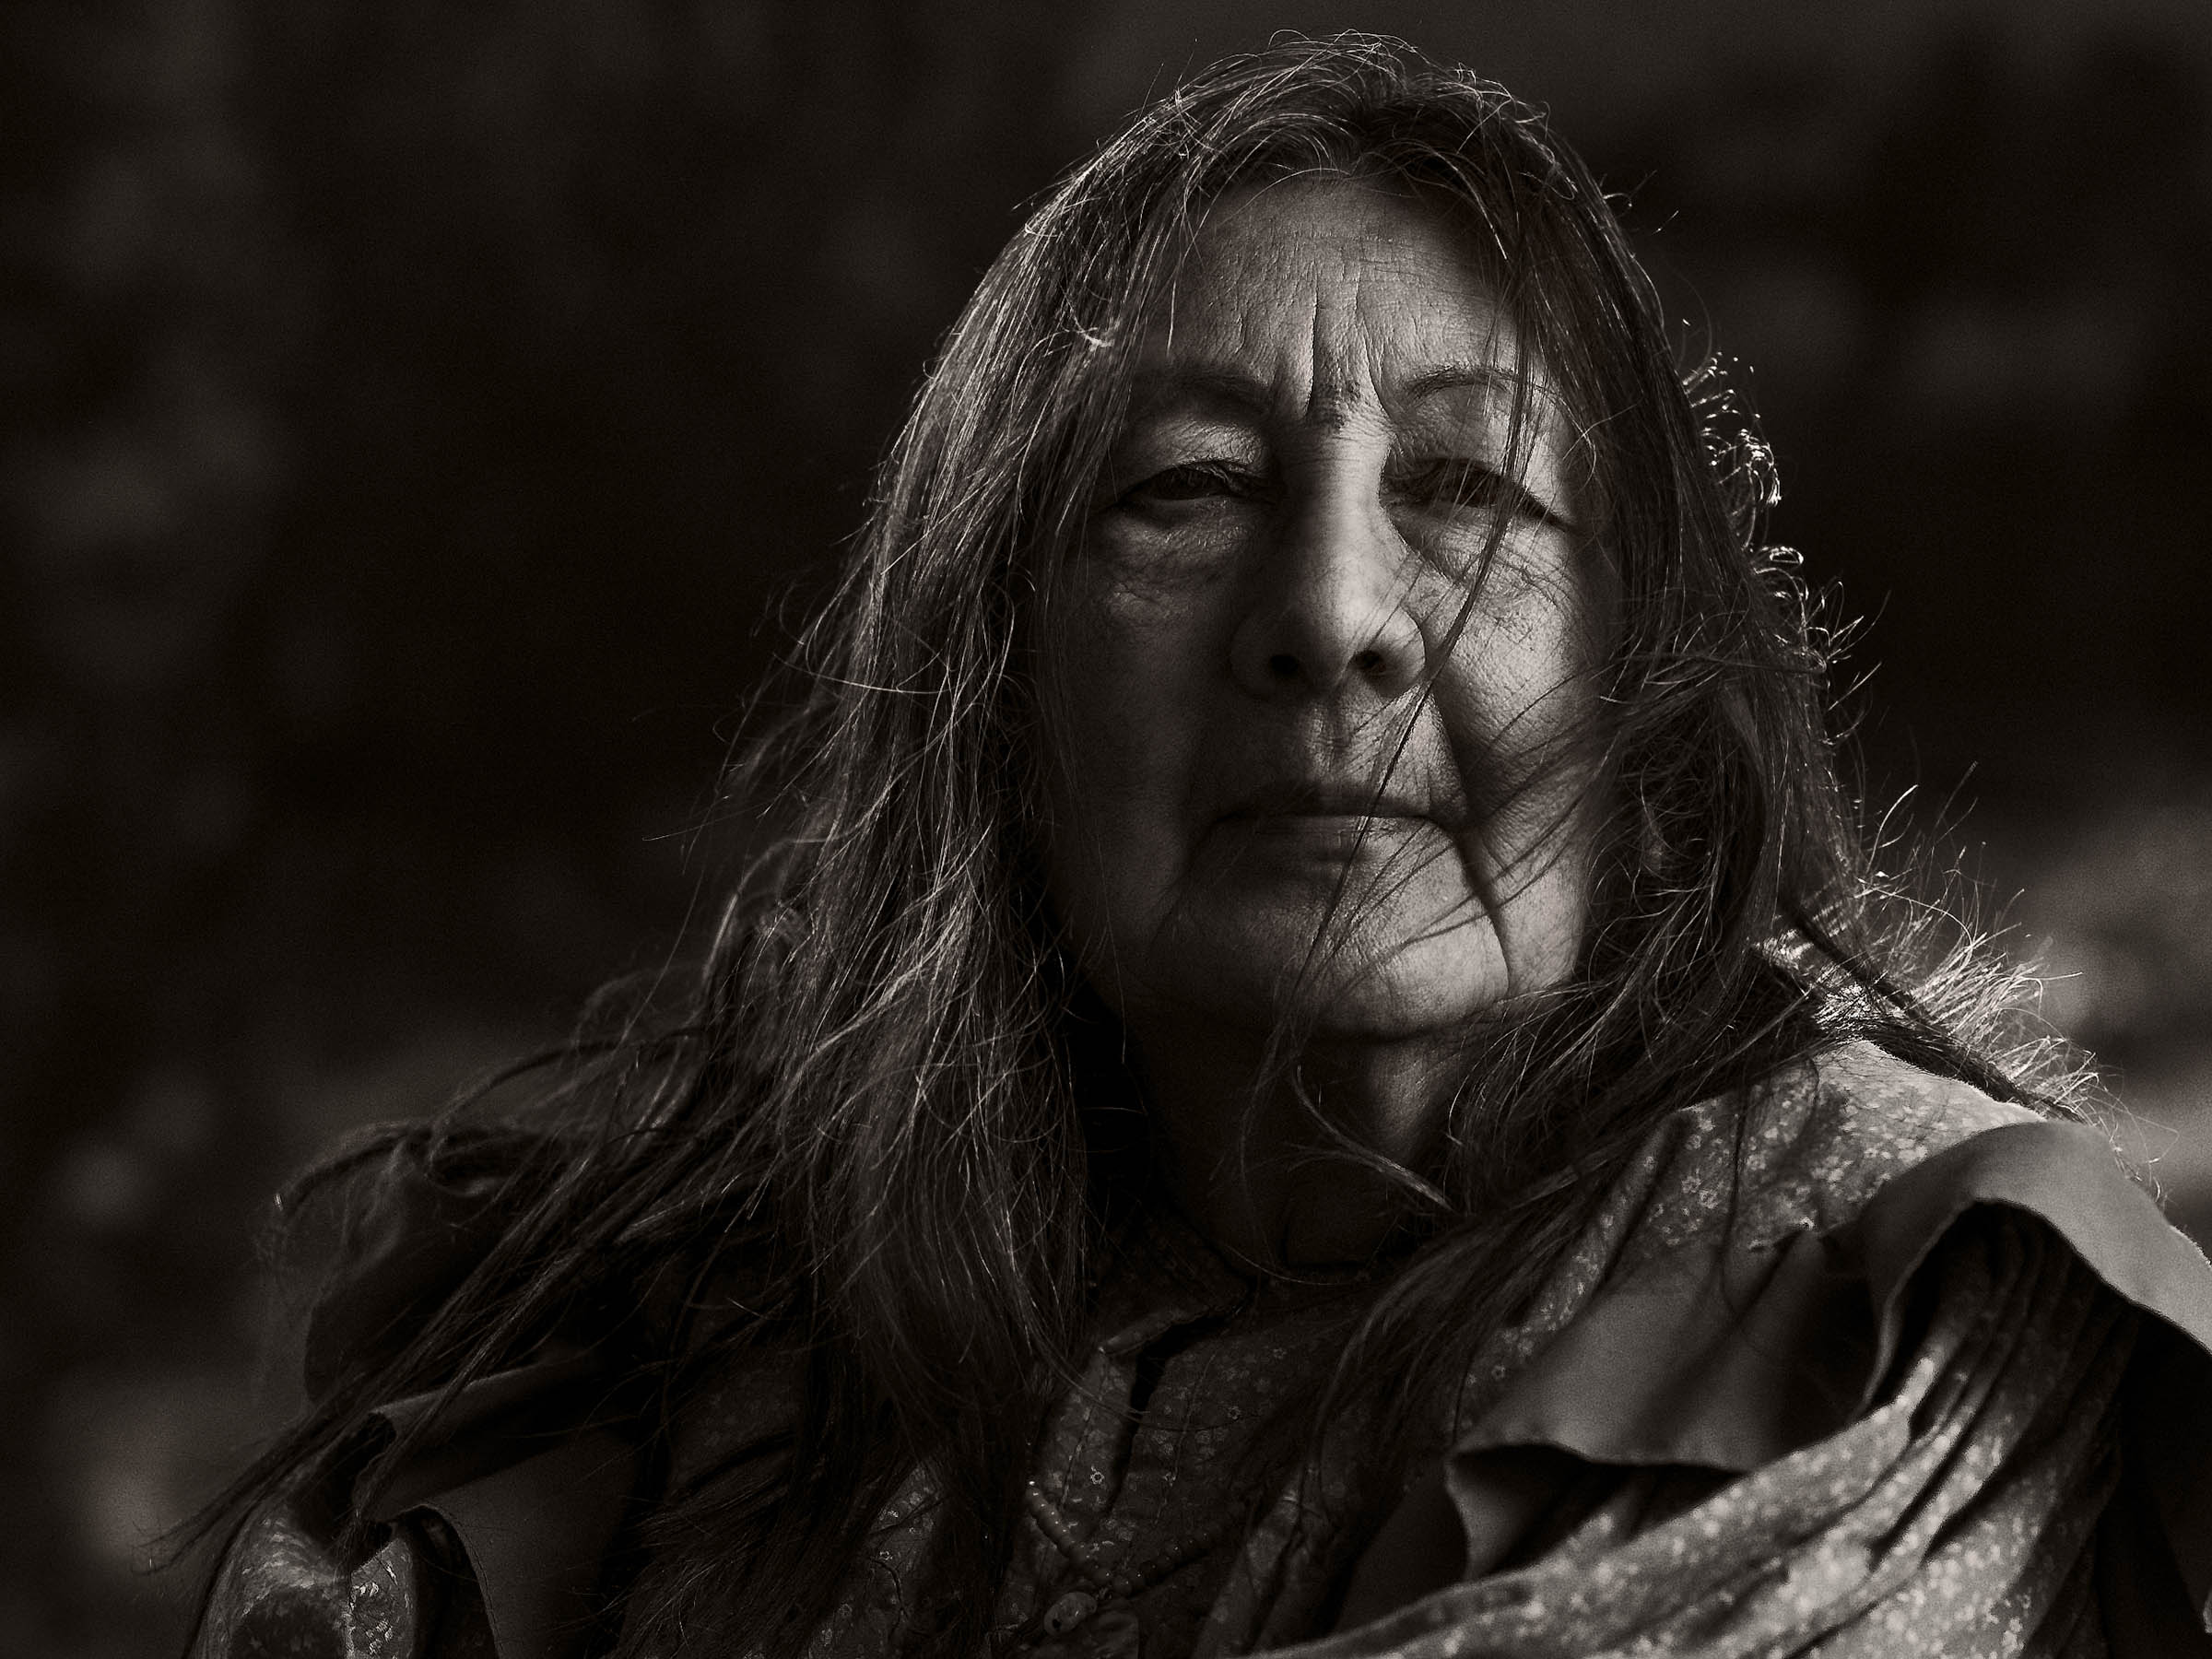 Francesca Veltri Chiracahua Apache Elder Mimbres Valley New Mexico Professional Celebrity Native American Portrait by Wick Beavers Best Professional Portrait Photographer in NYC and LA Rome Paris and London